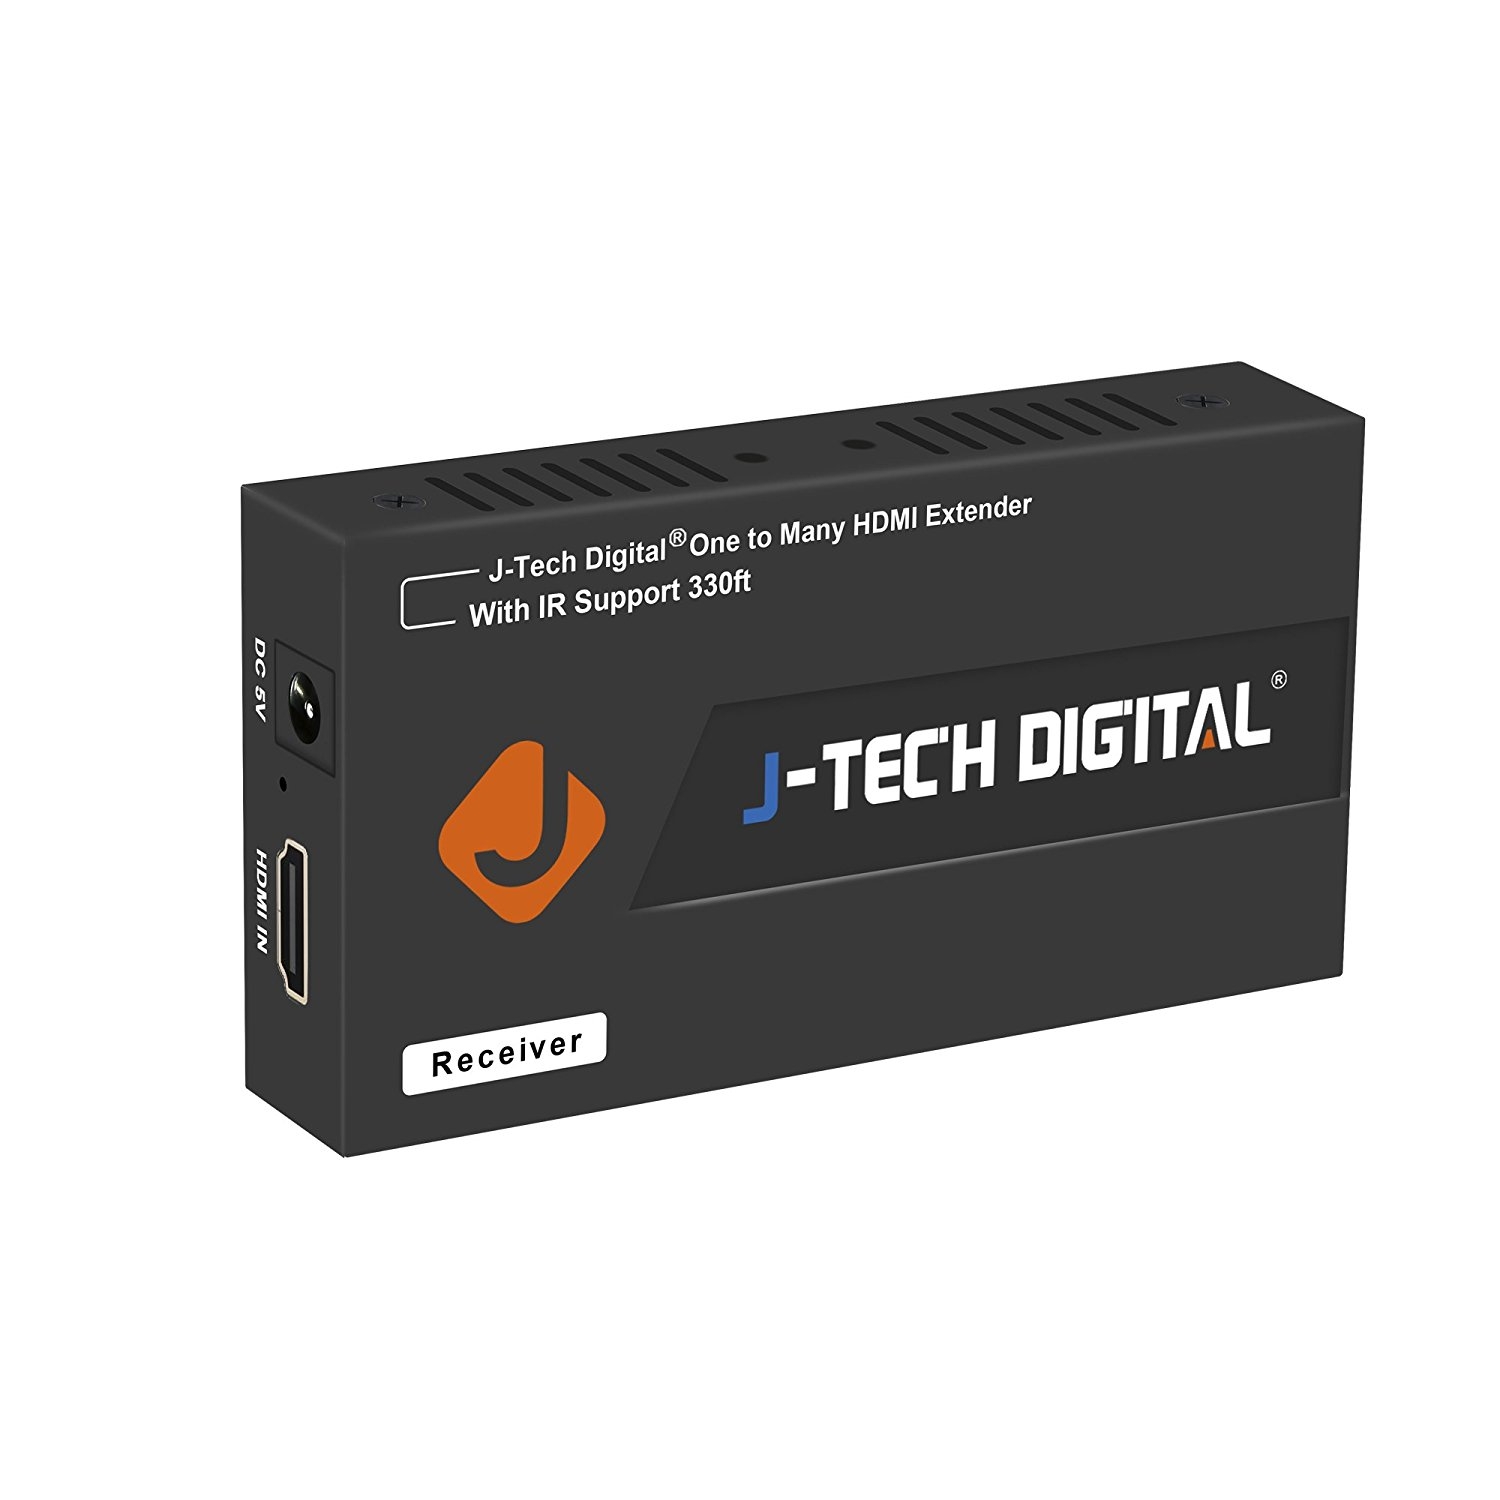 J-Tech Digital HDMI Extender (Receiver+Transmitter One to Many) - image 3 of 6